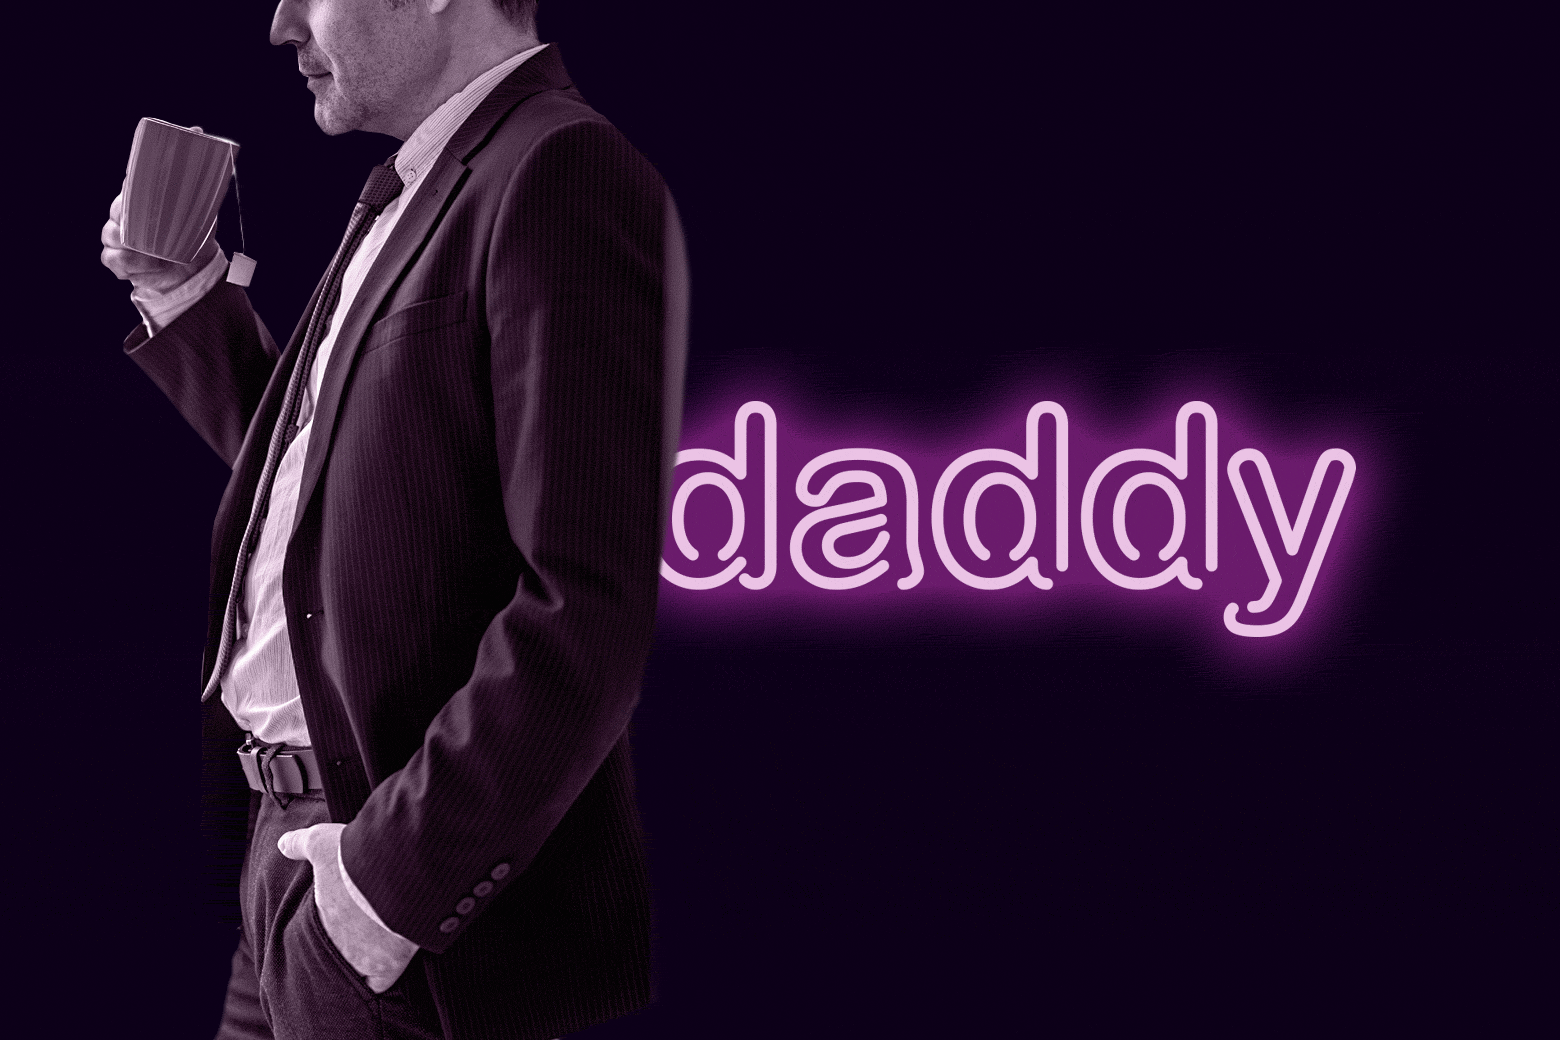 A man in a suit drinking coffee in front of a flashing "daddy" si...